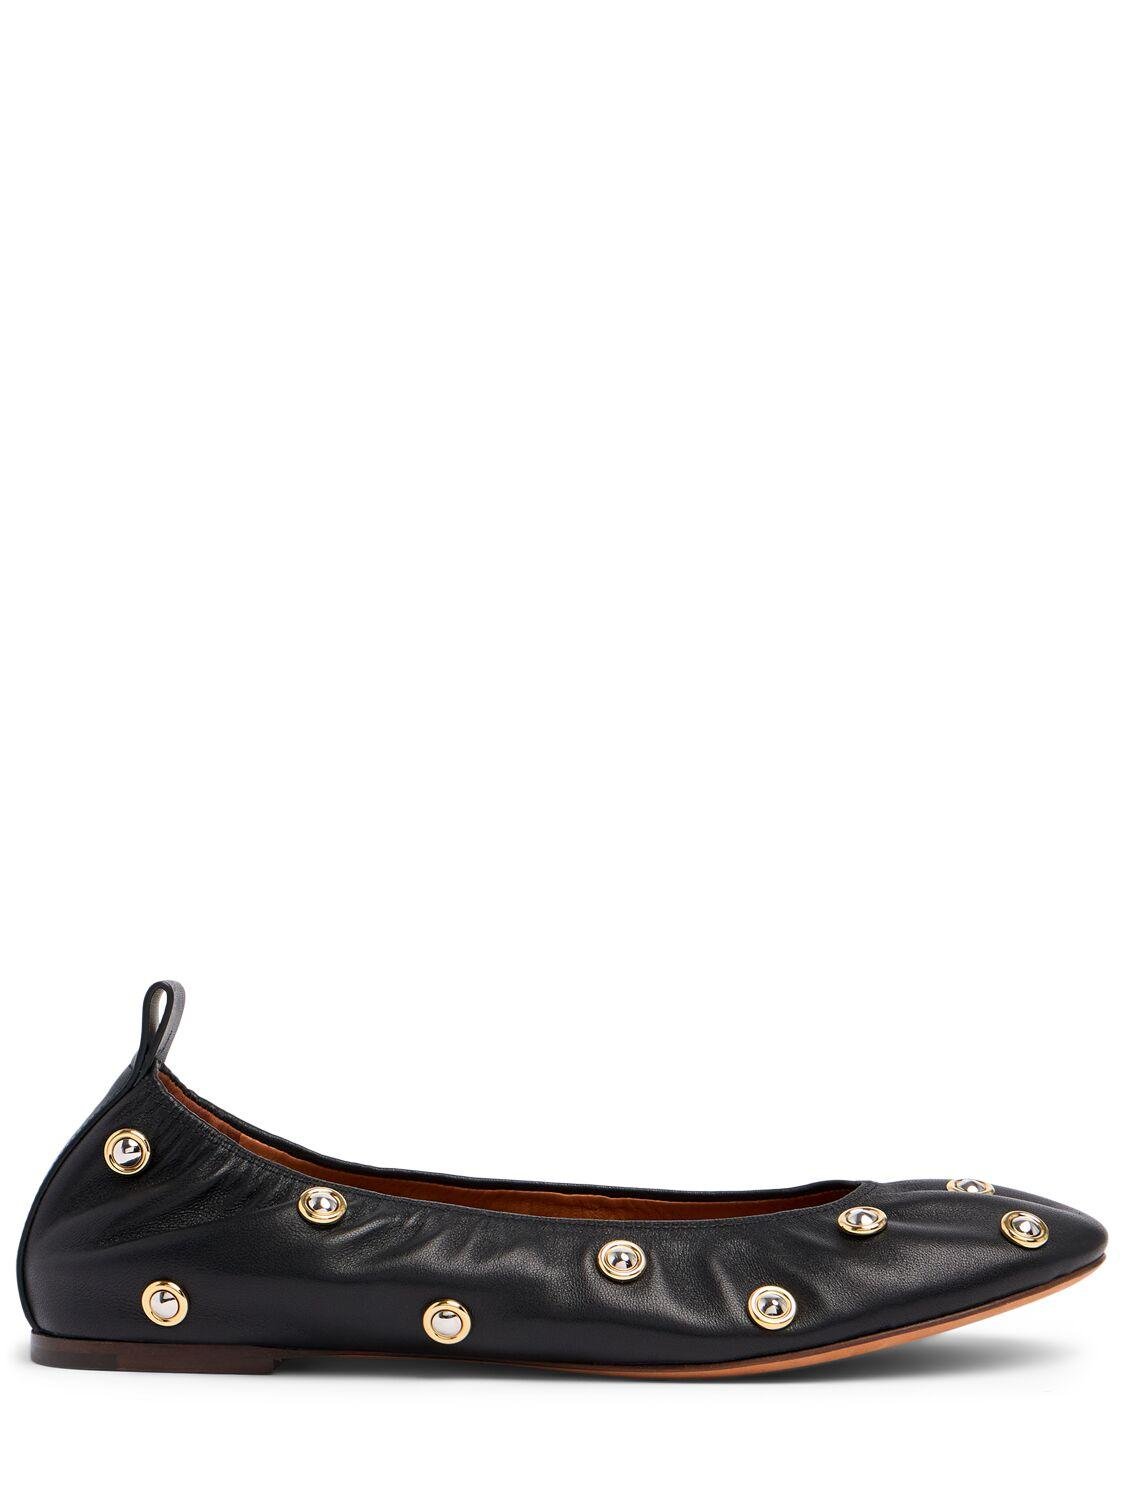 10mm Studded Leather Ballerinas by LANVIN